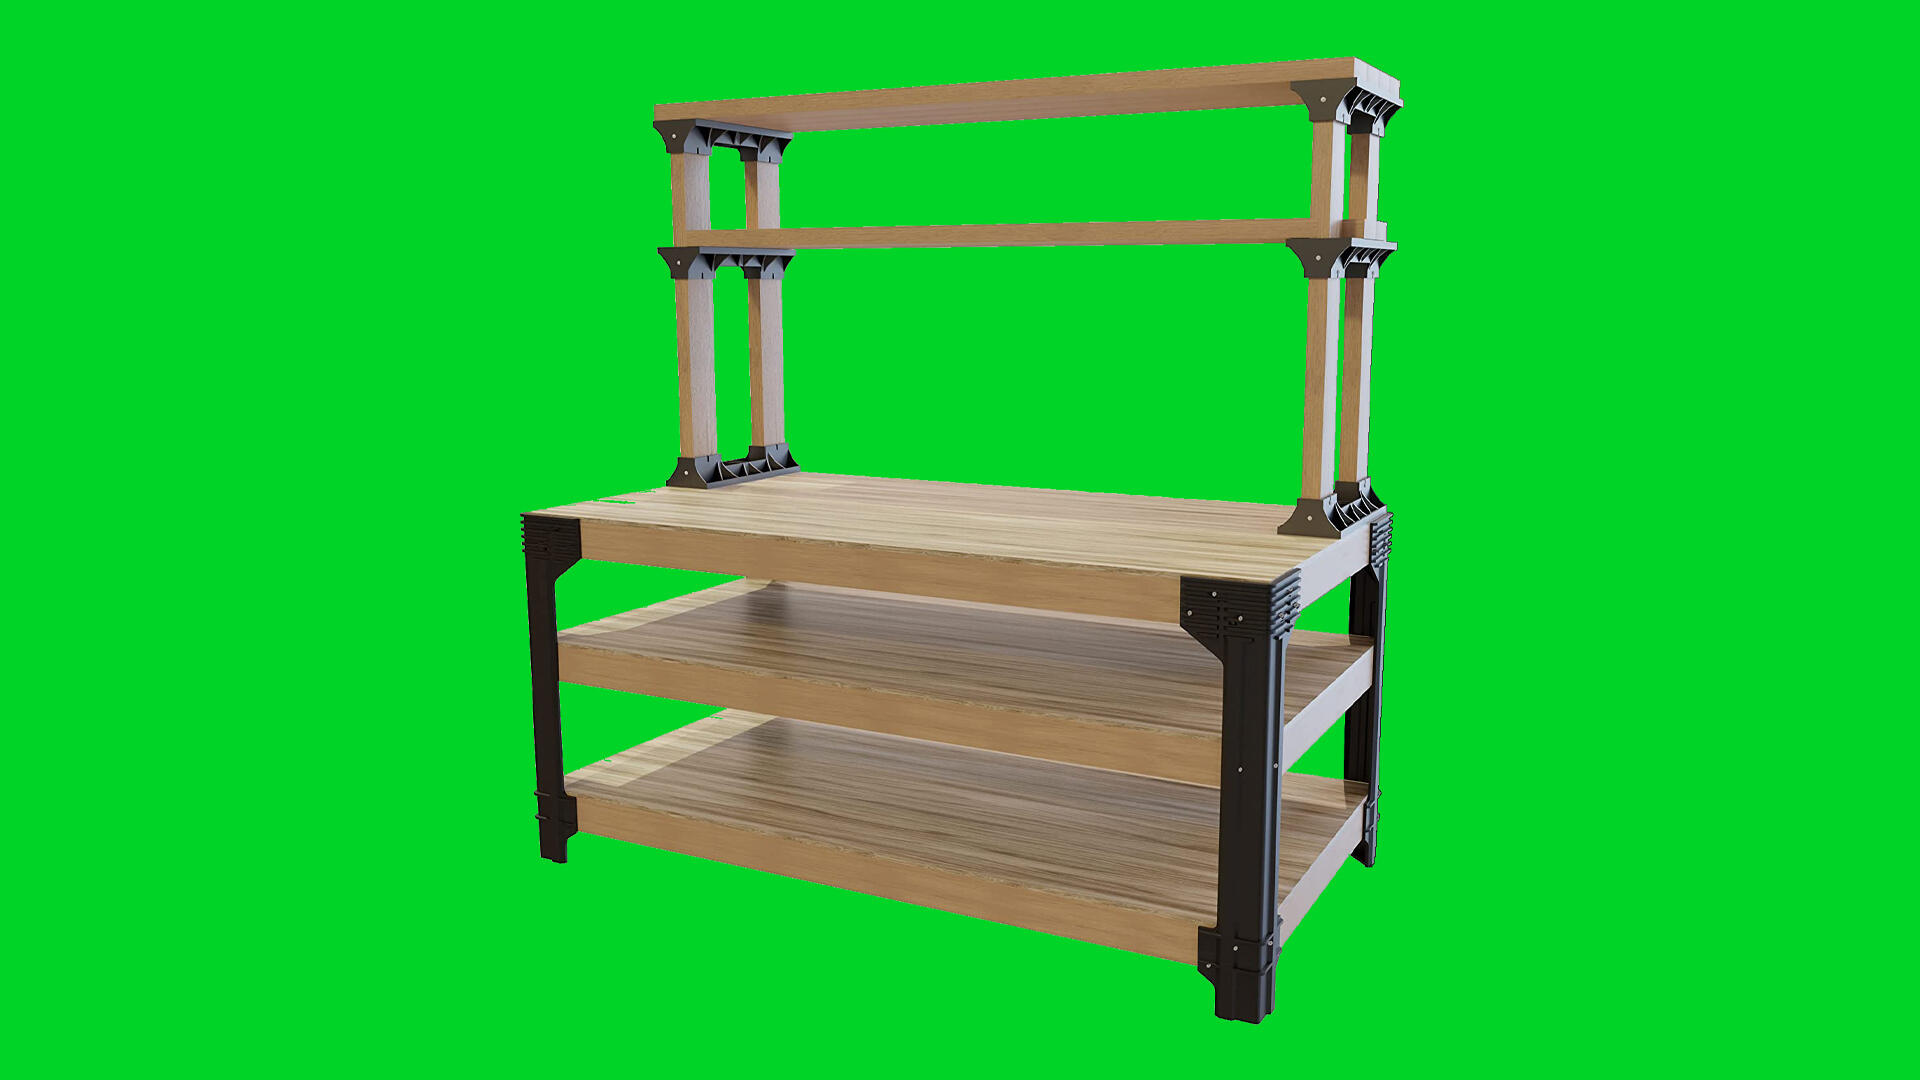 The 5 Best Garage Shelving of 2024 - Reviews by Your Best Digs